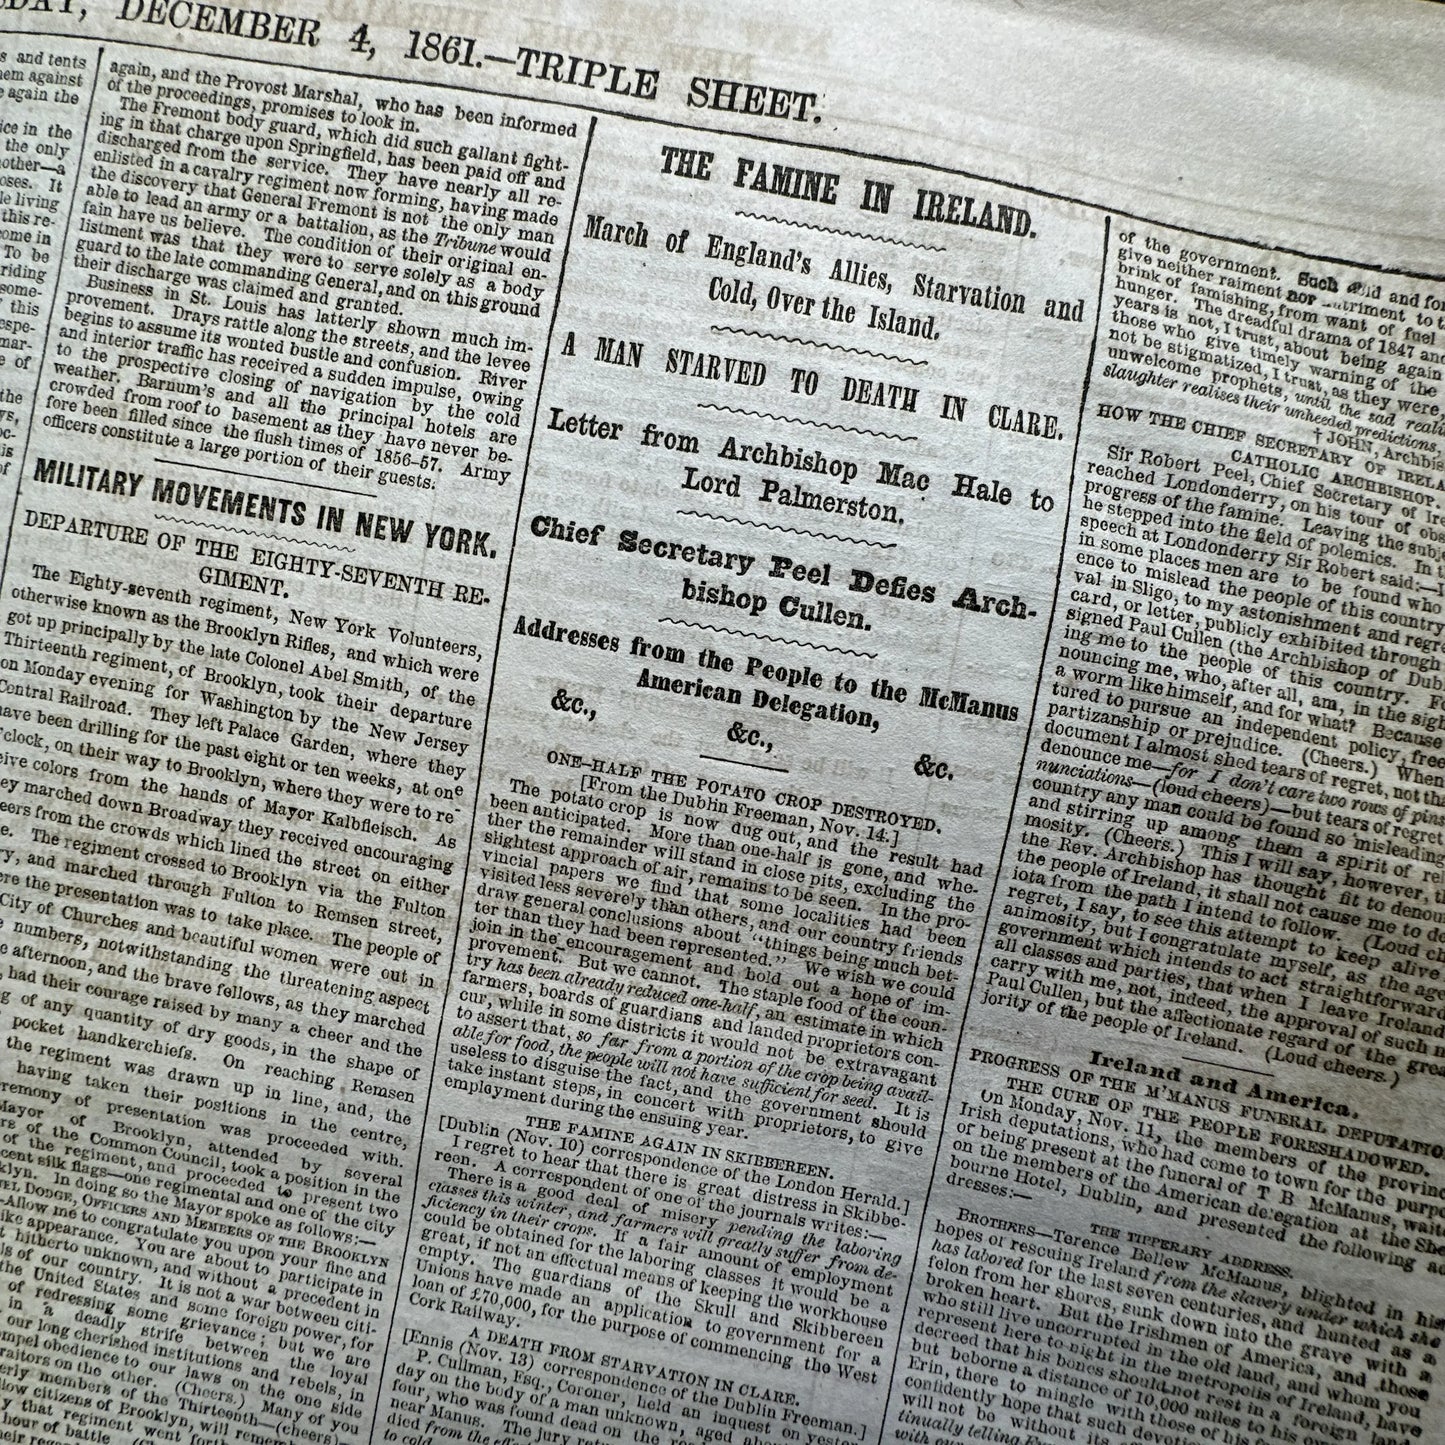 1861 Newspaper reporting Lincoln’s First State of the Union Address